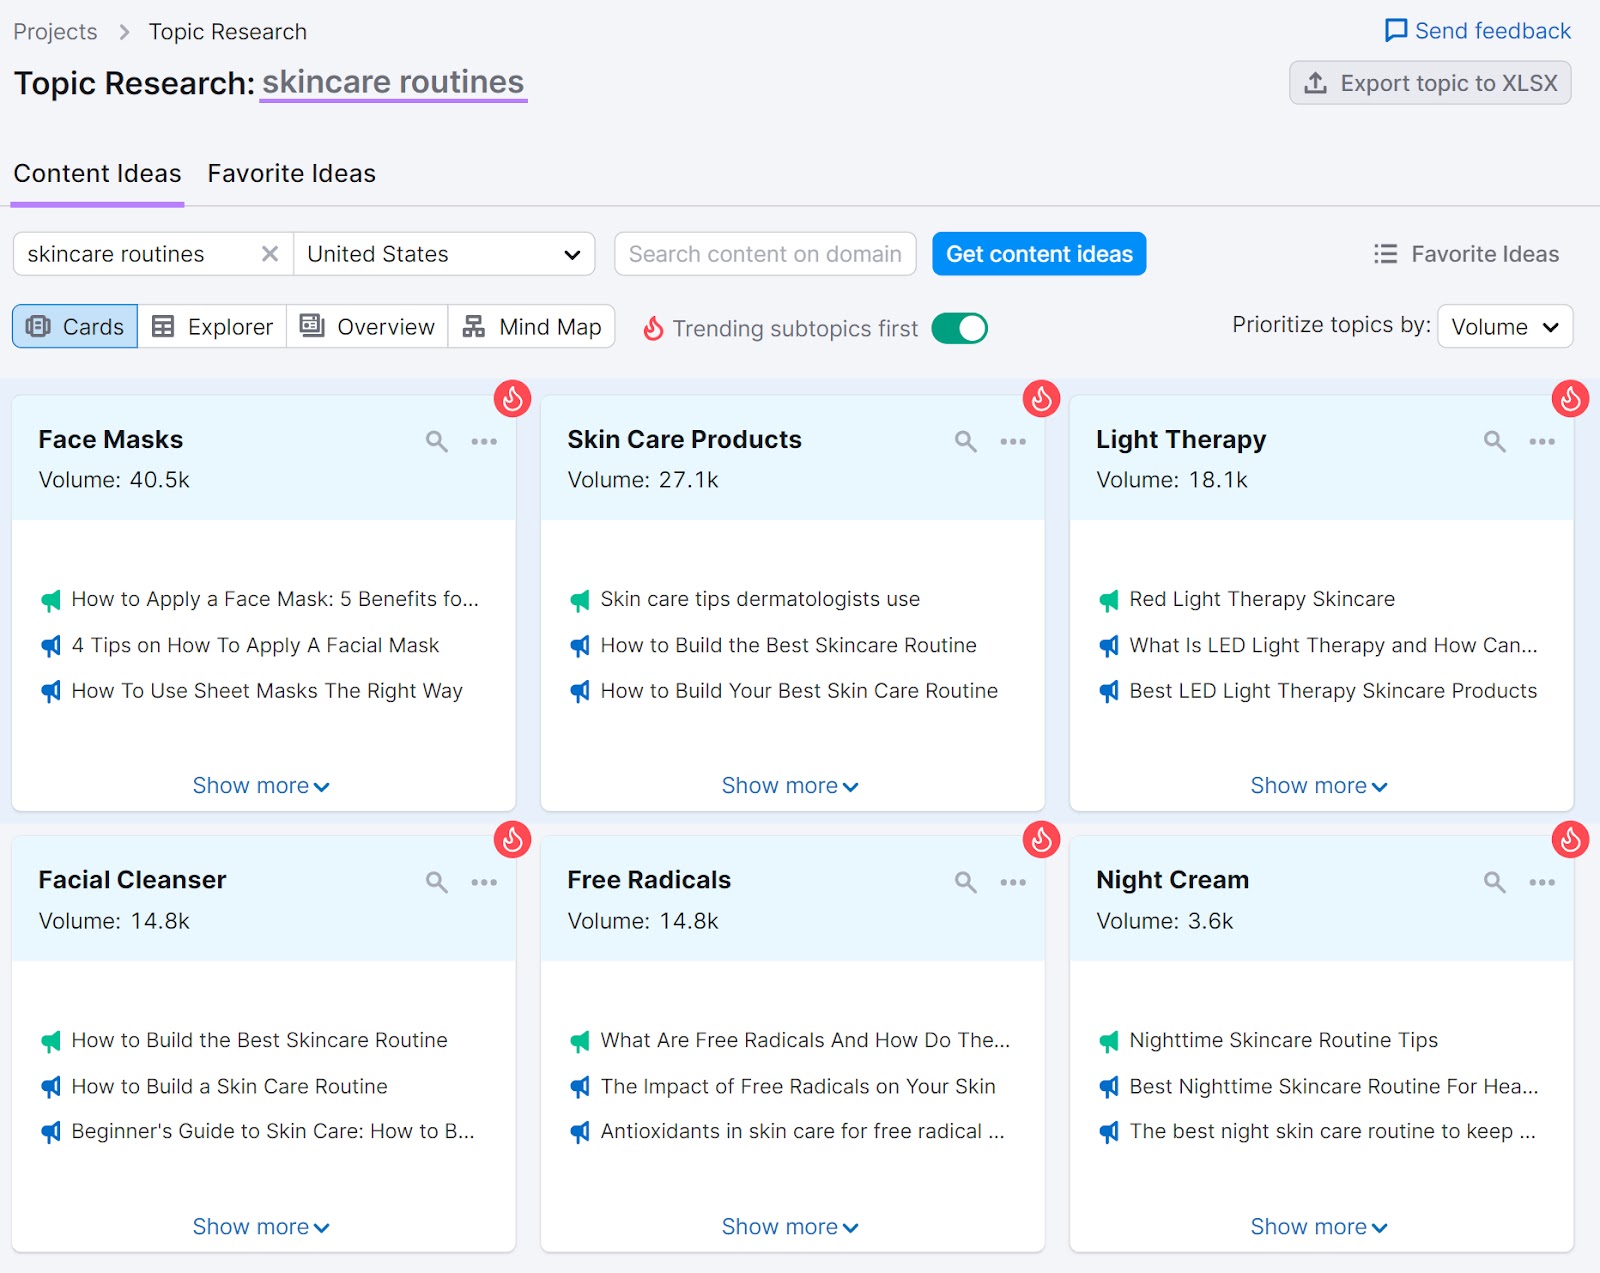 "Content Ideas" dashboard for "skincare routines" in Topic Research tool